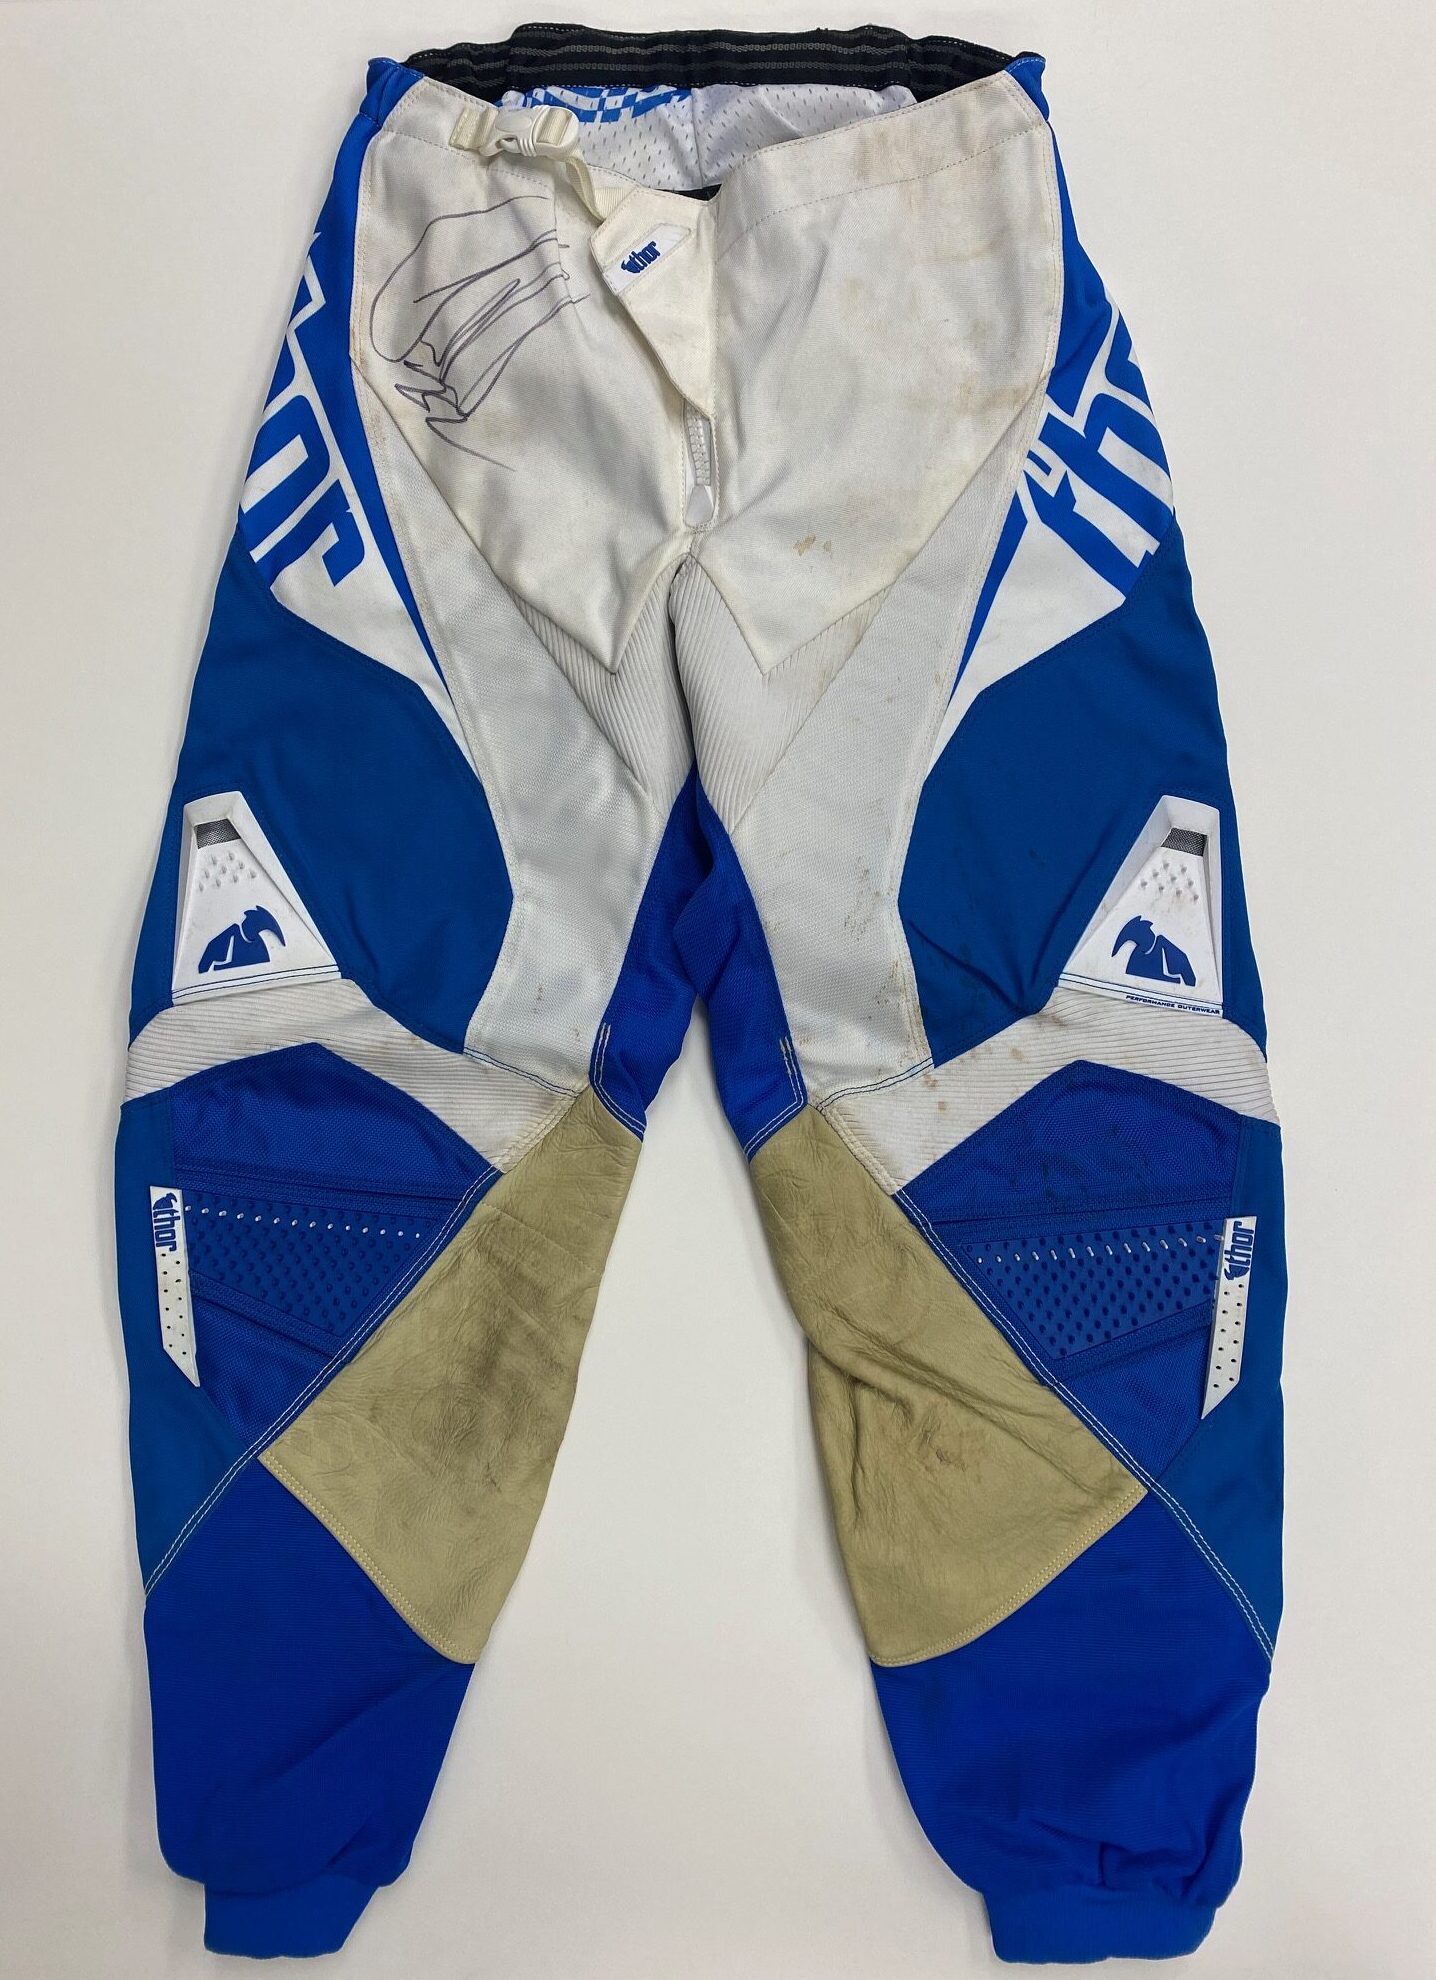 Chad Reed Worn Thor Pants - Autographed Collectables